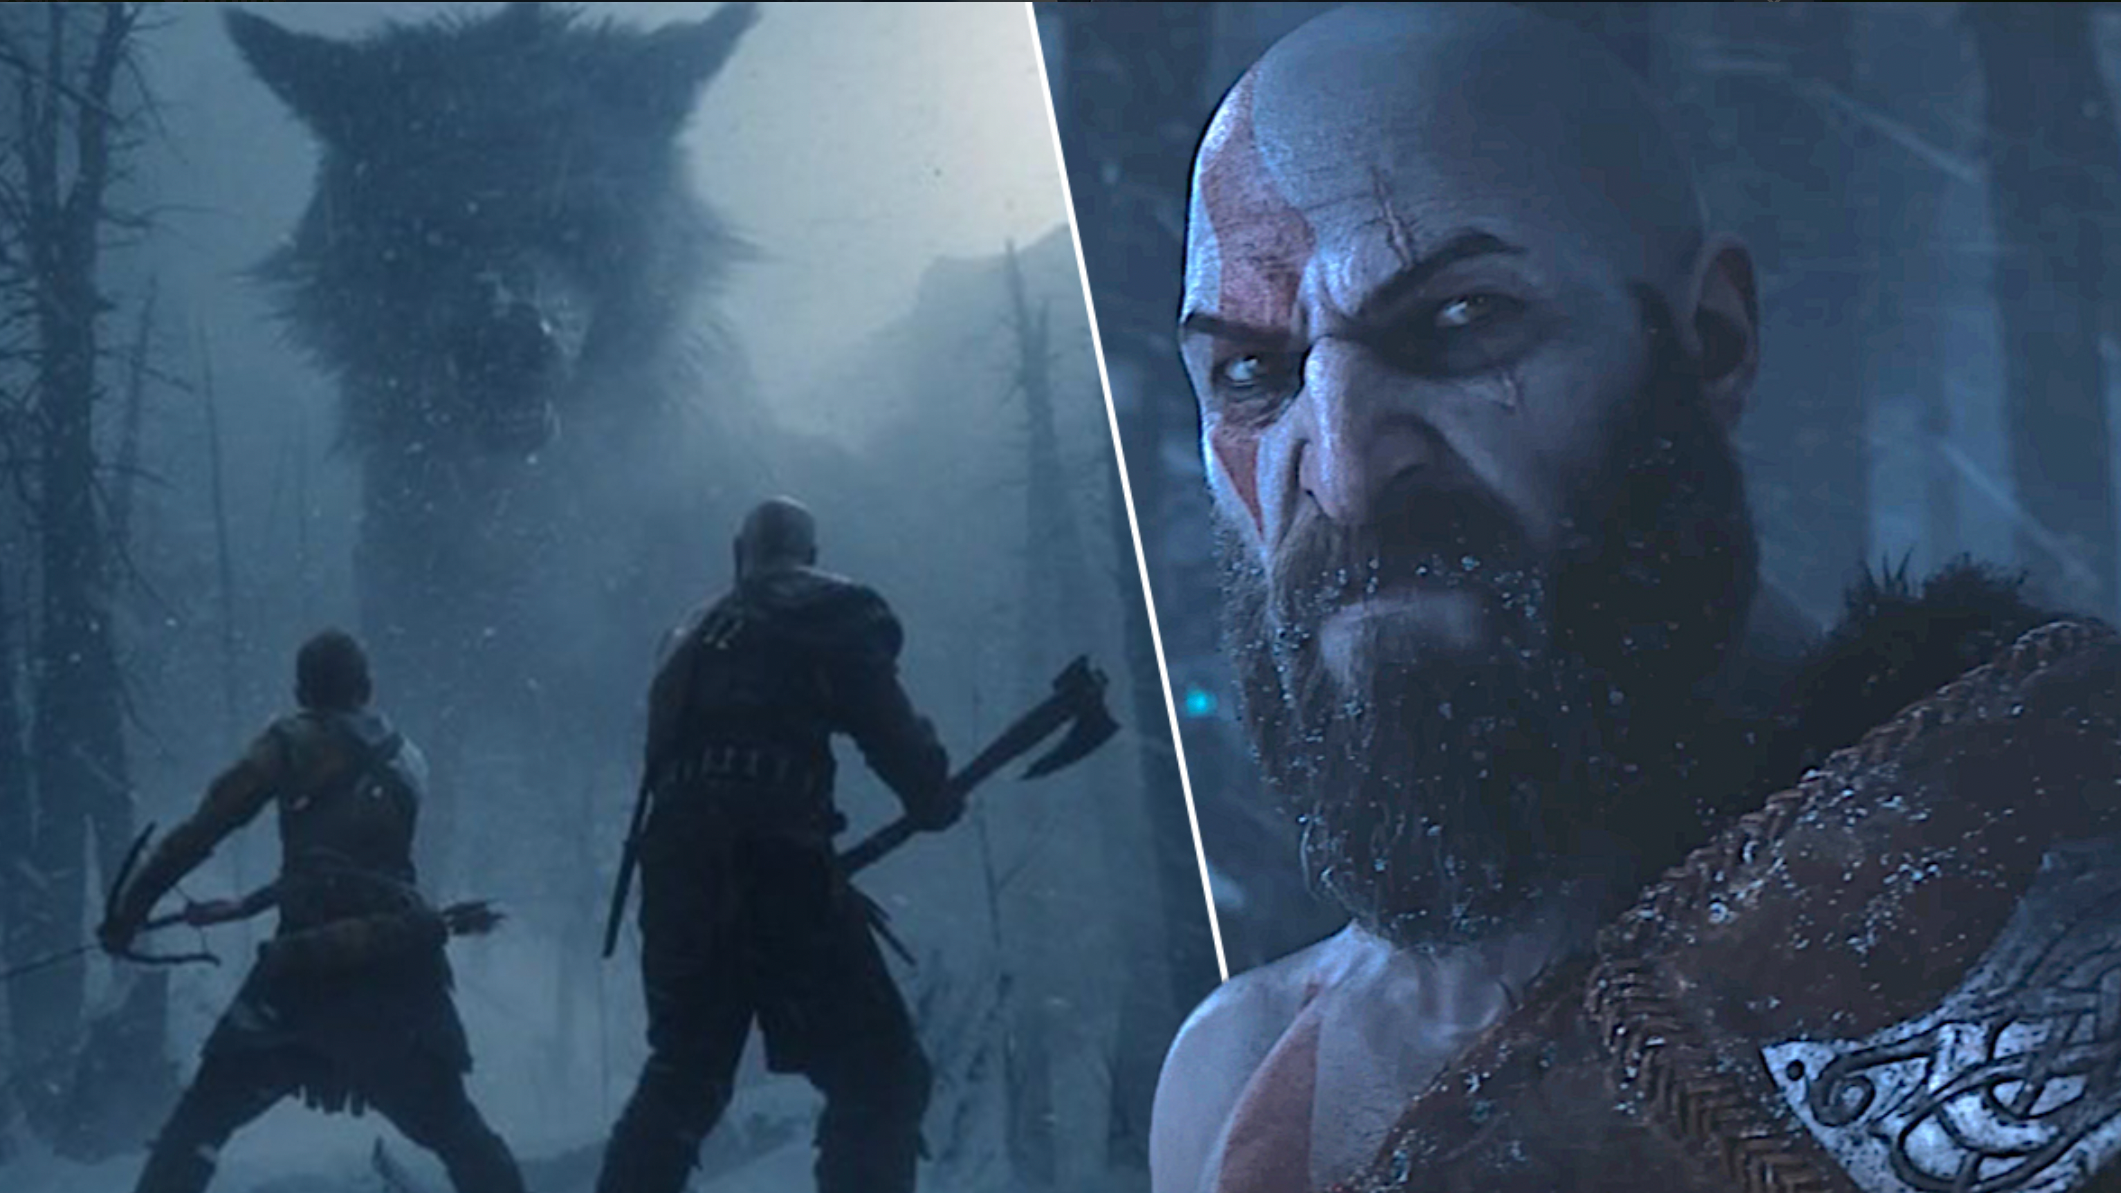 God Of War Art Director Says Odin Was The Hardest Character To Design